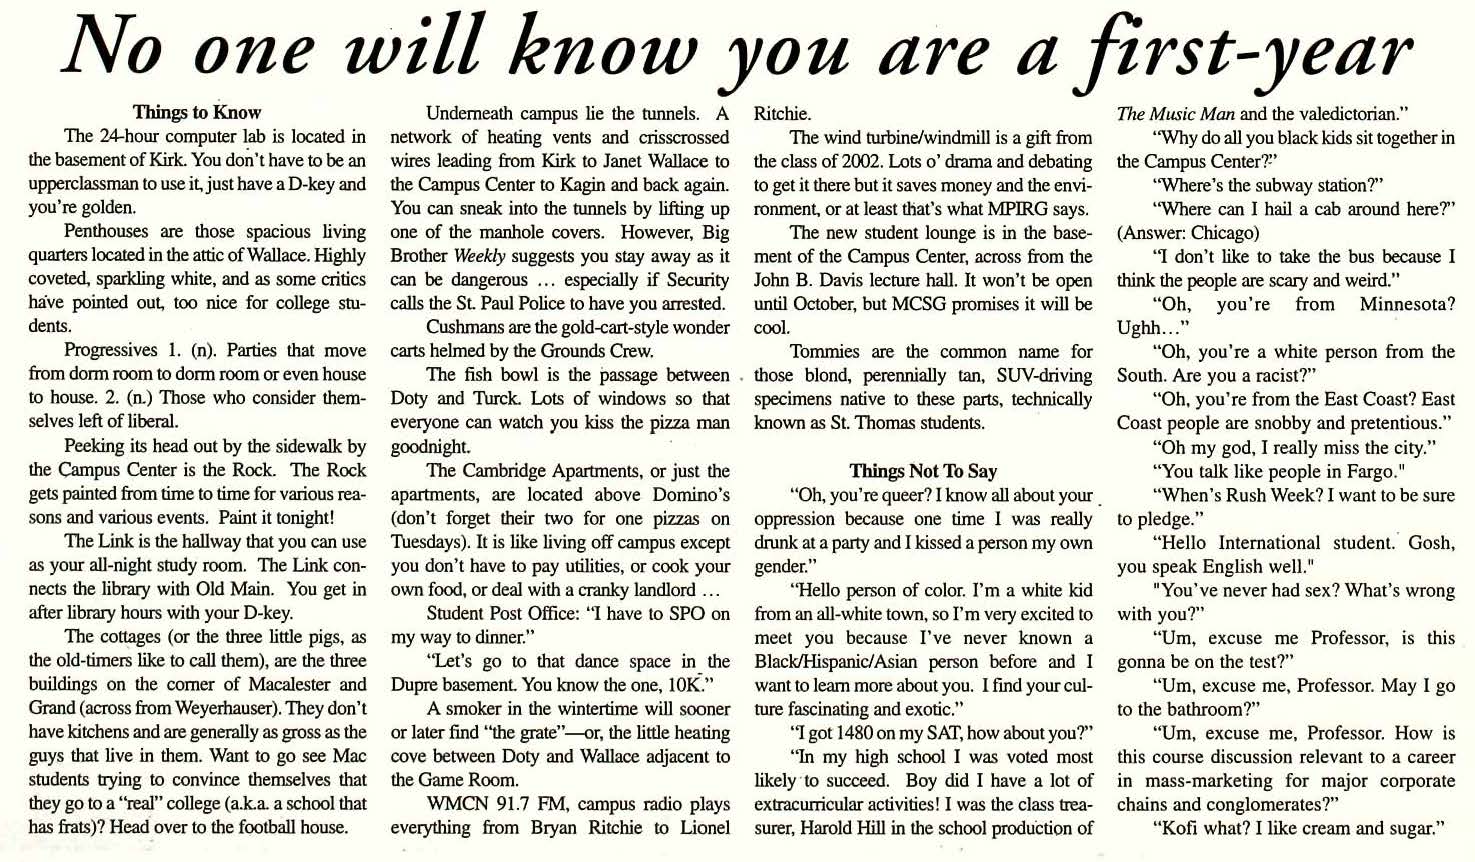 The Mac Weekly, September 4, 2003. No one will know you are a first year.